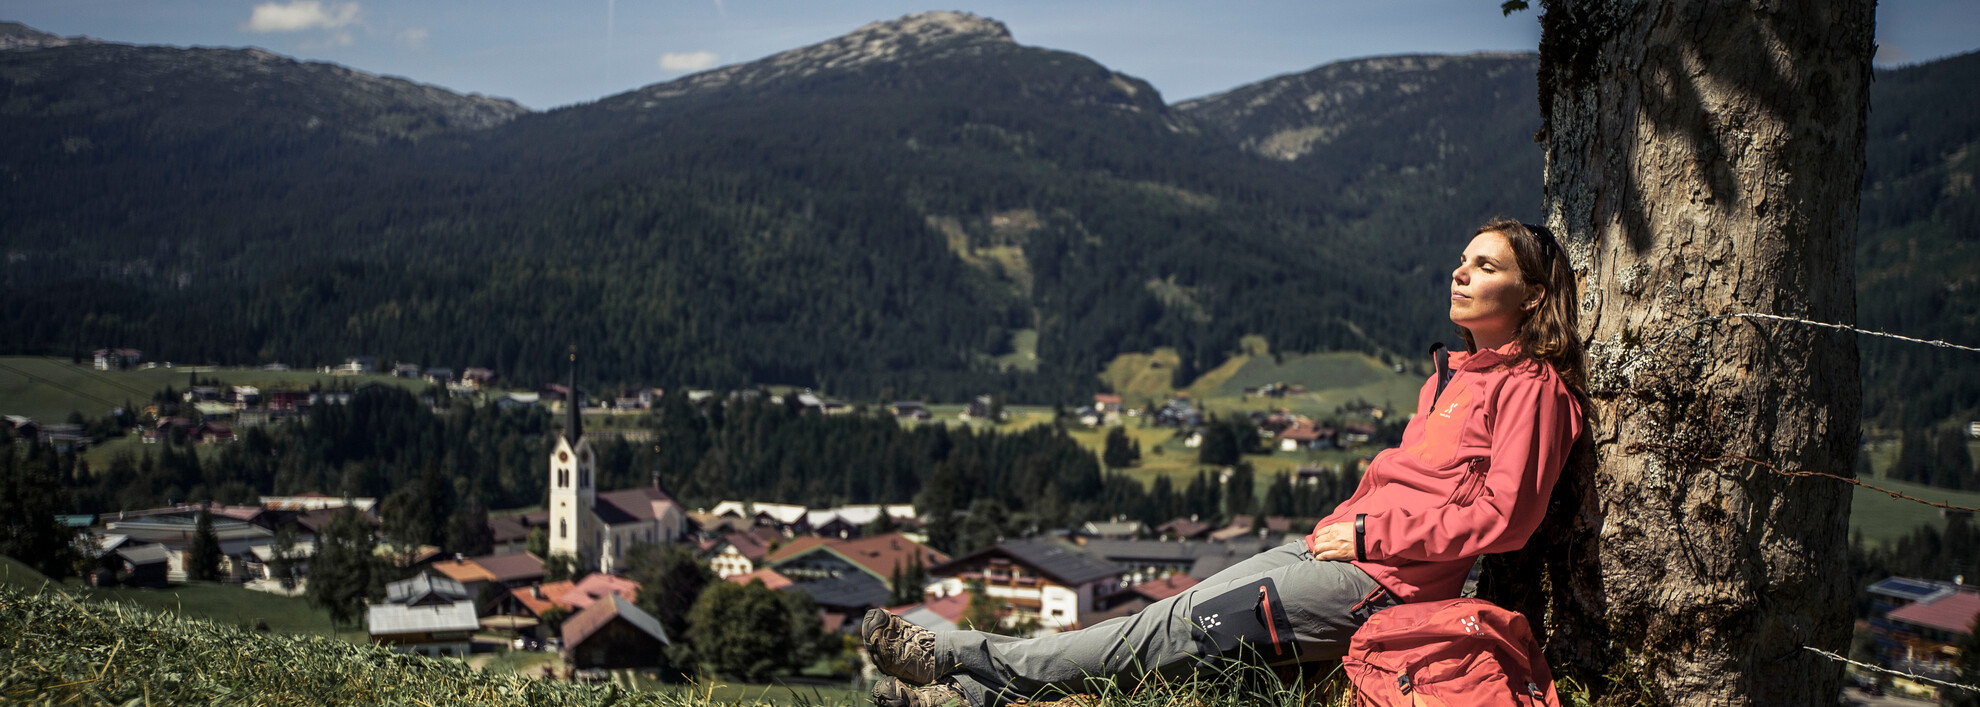 Relaxation while hiking with Ifen in view | © Kleinwalsertal Tourismus eGen | Photographer: Oliver Farys